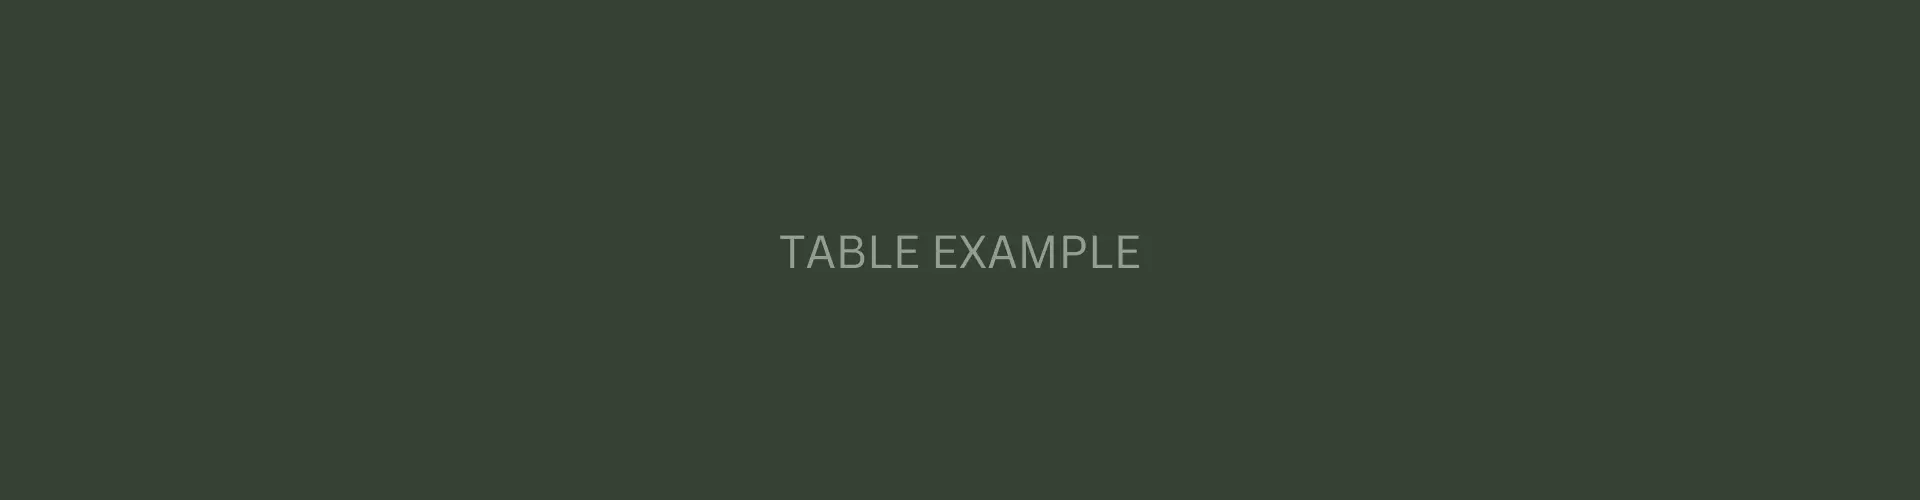 TABLE EXAMPLE.png